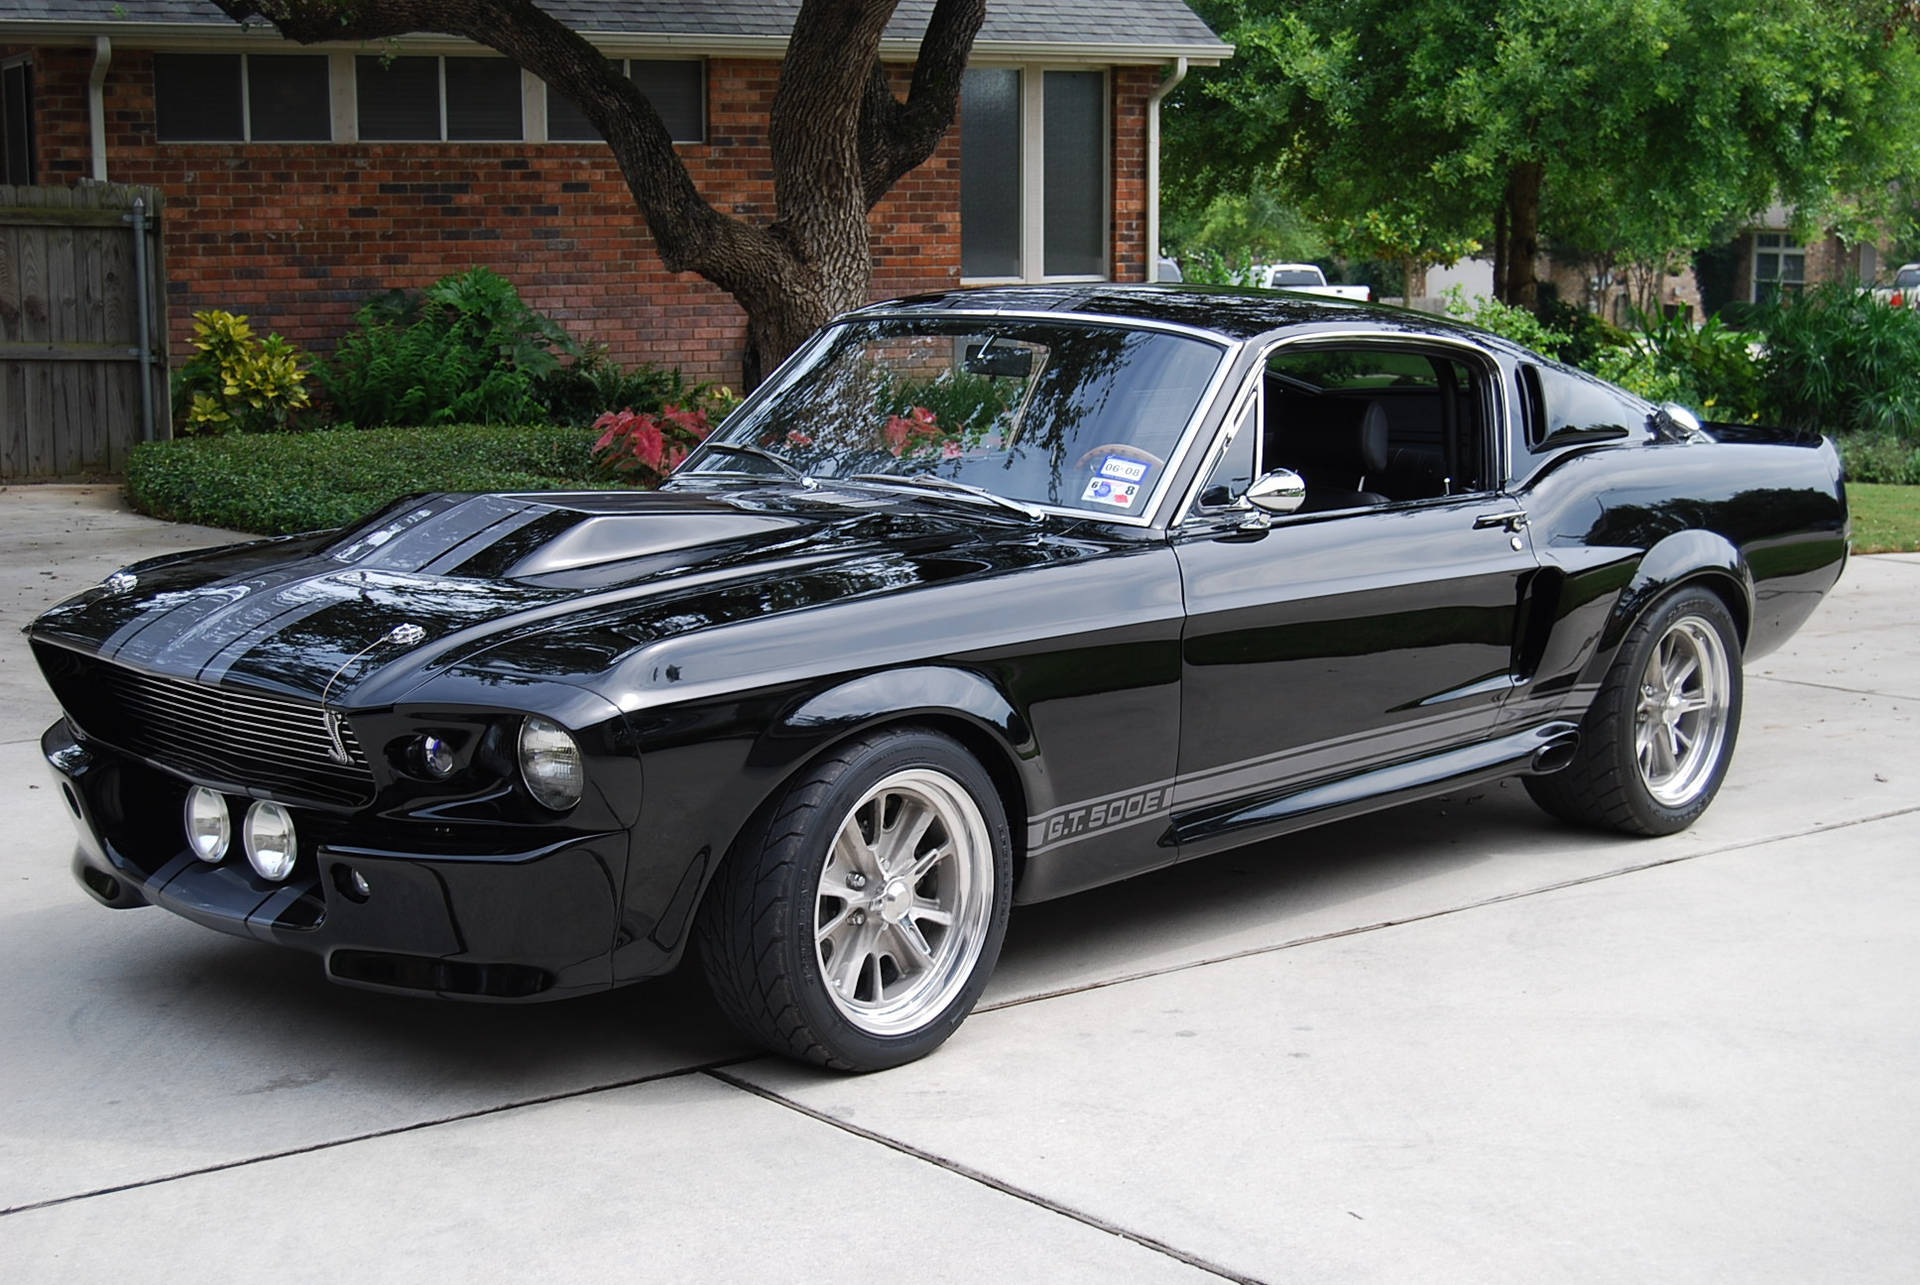 Parked Black Gt500e Mustang Hd